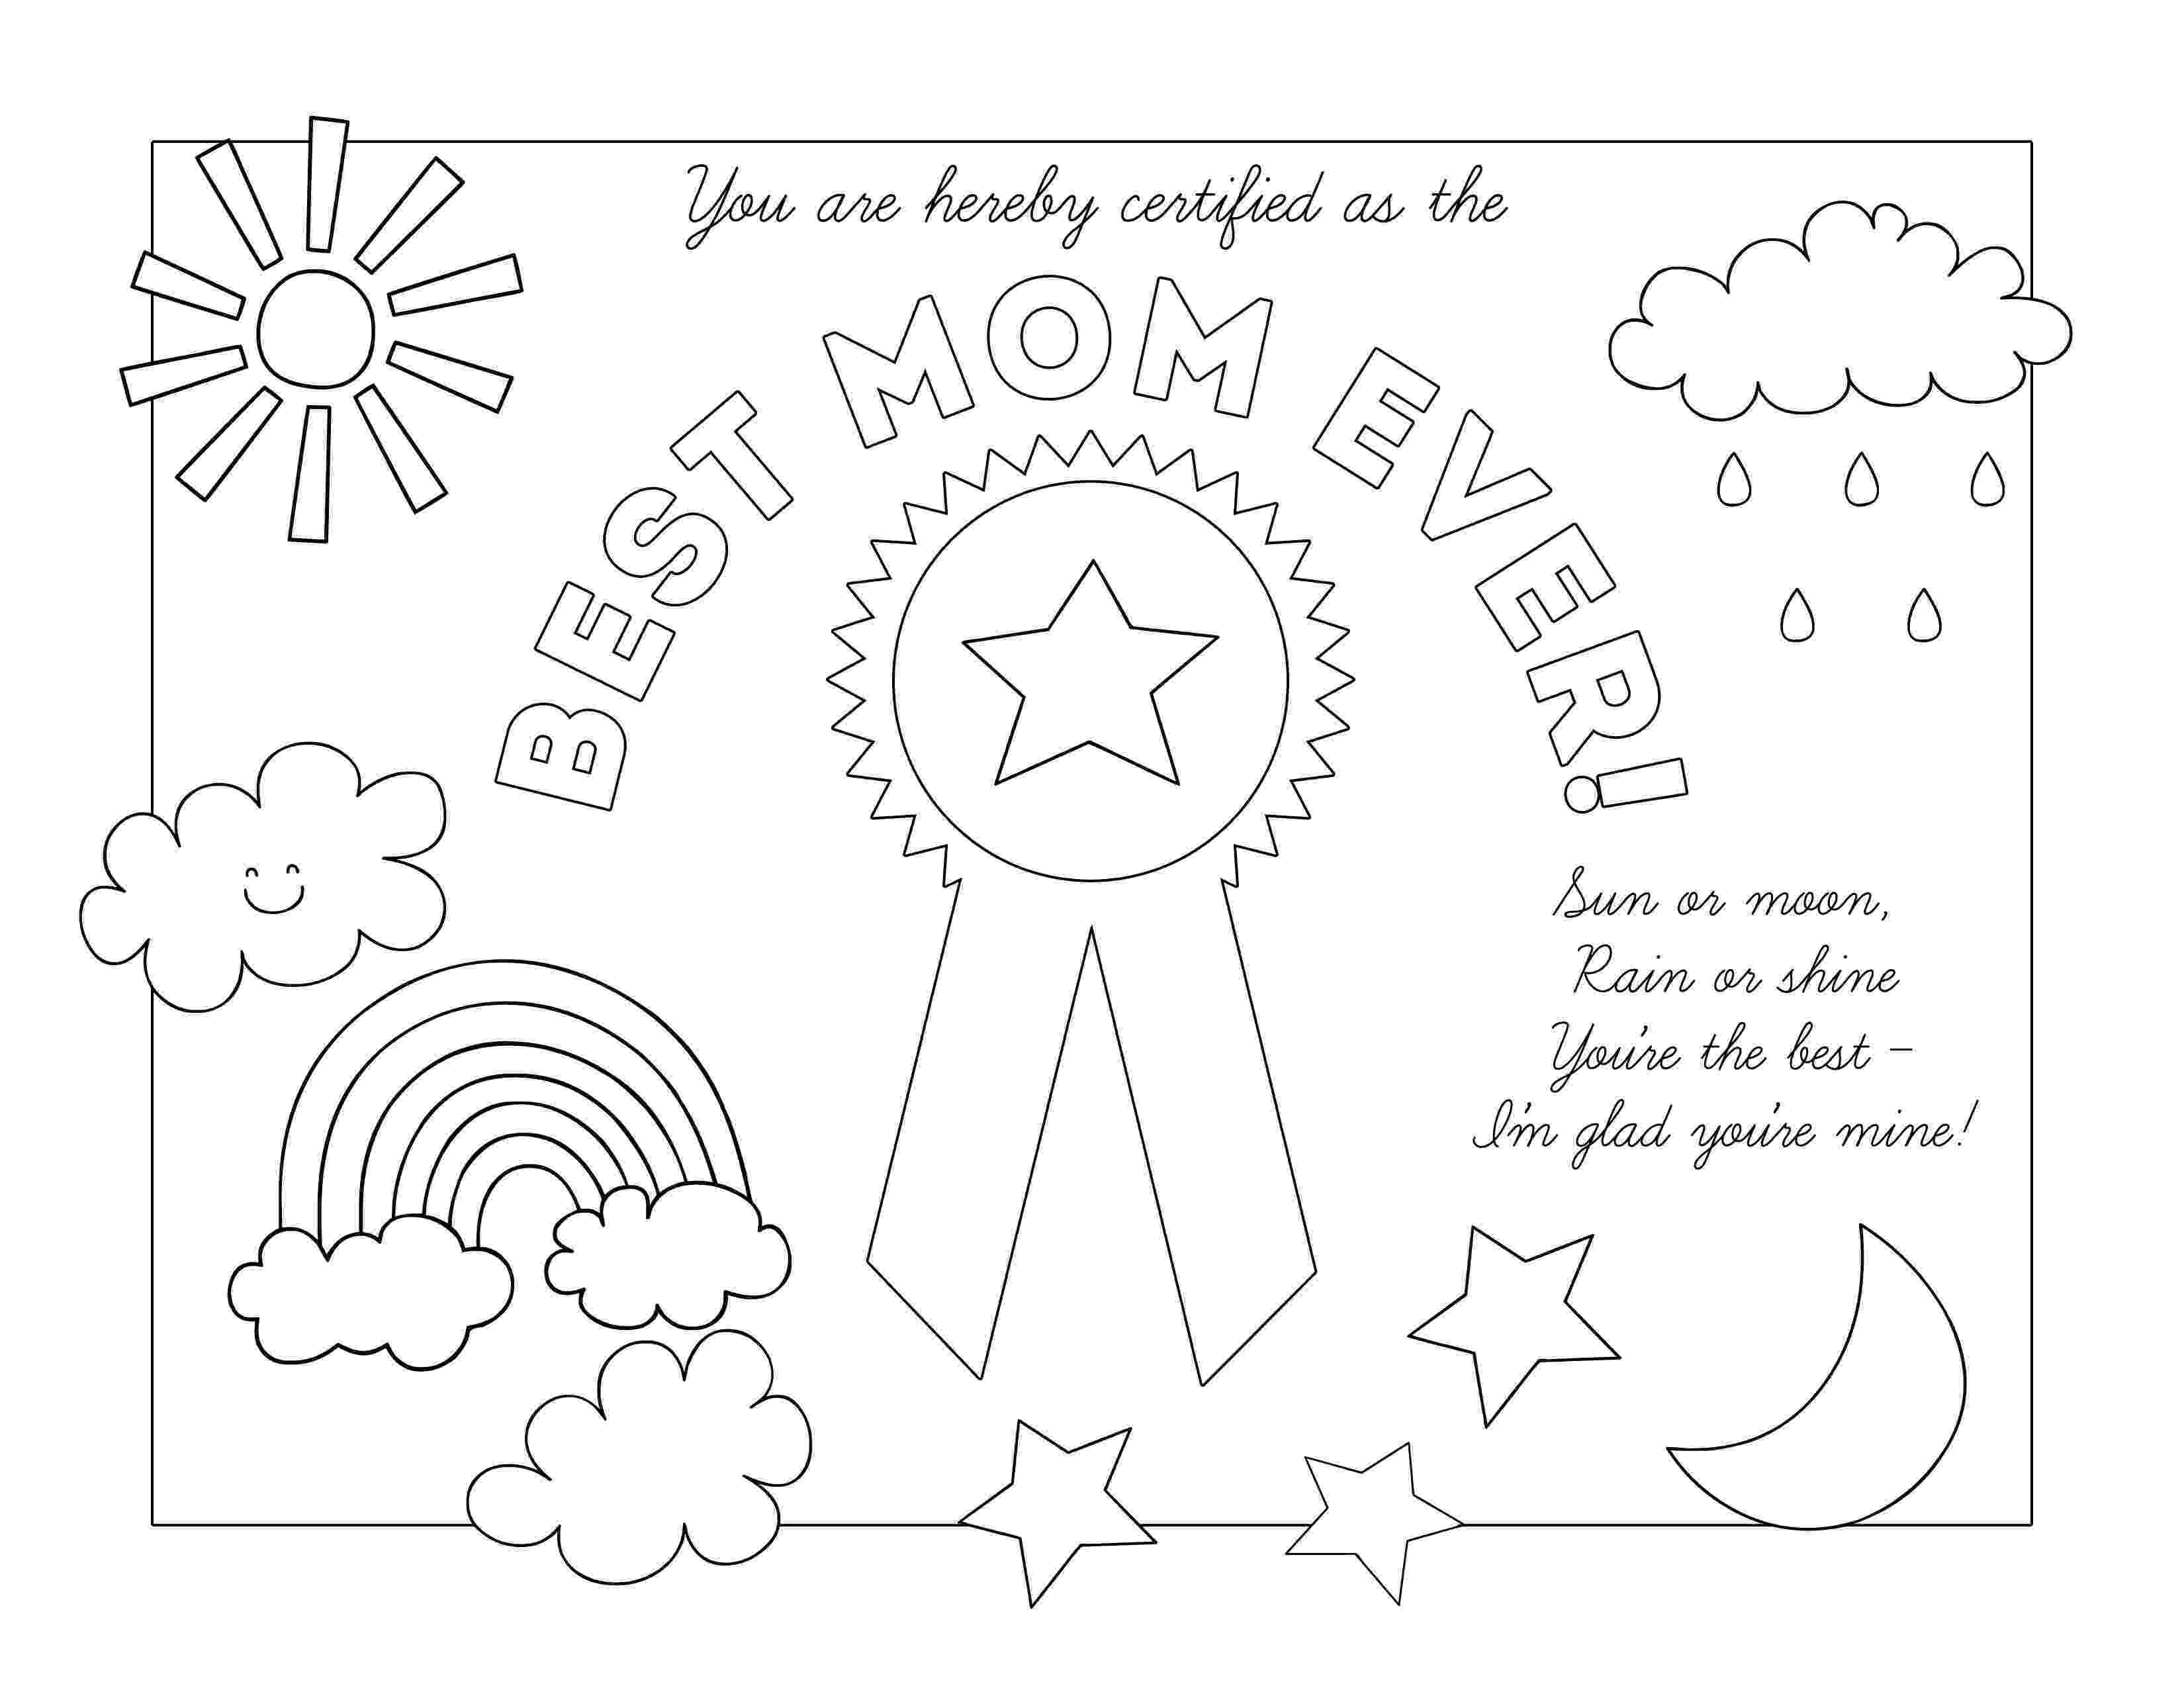 best teacher award coloring pages worlds best teacher diploma teacher best award coloring pages 